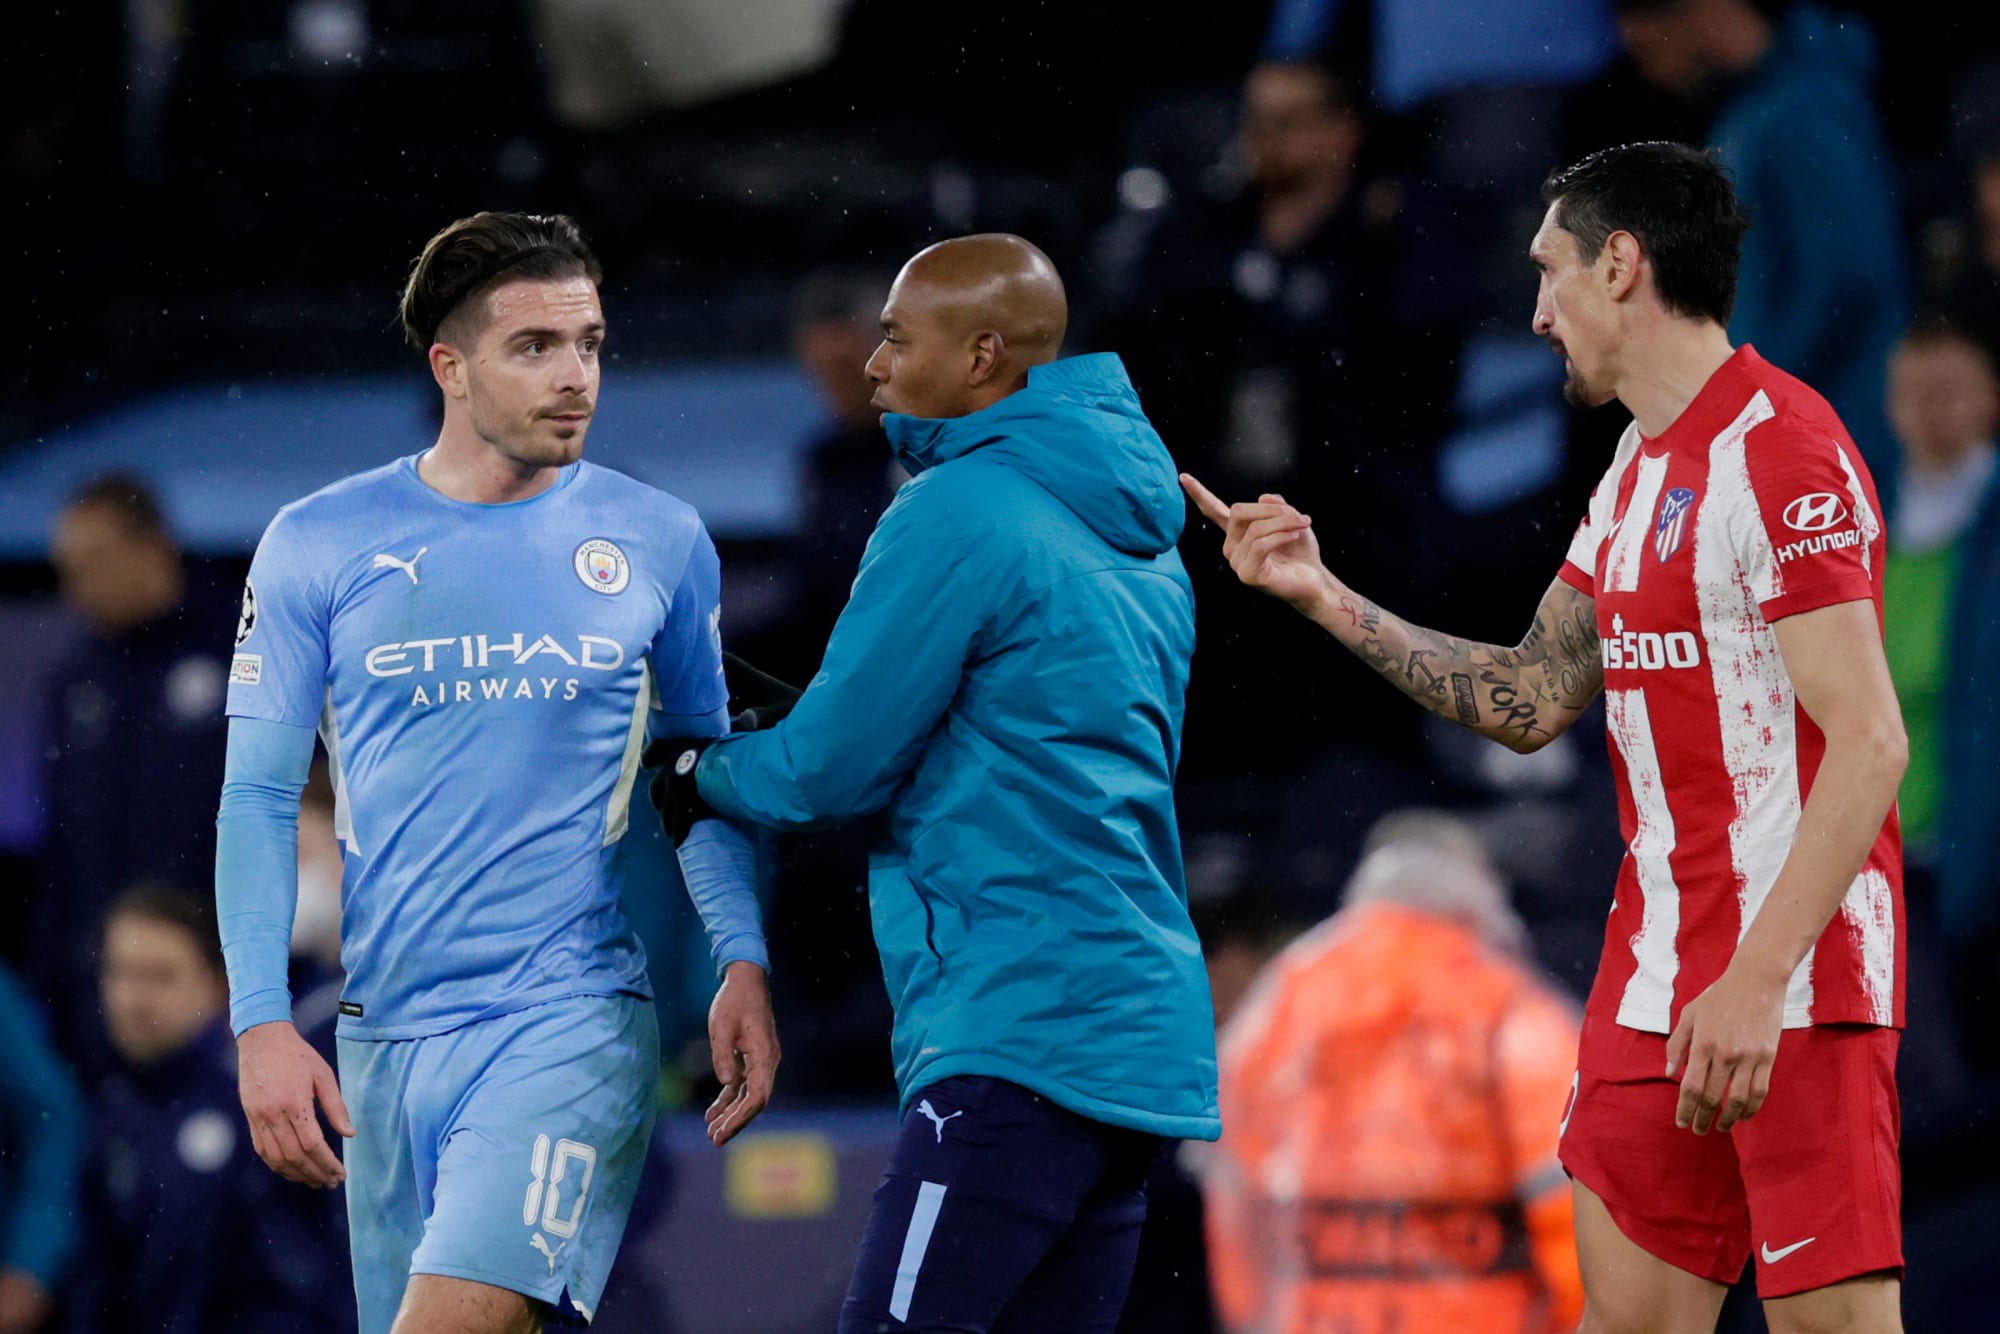 Photo of Man City’s Jack Grealish, Atletico’s Stefan Savic fight in tunnel after Champions League match